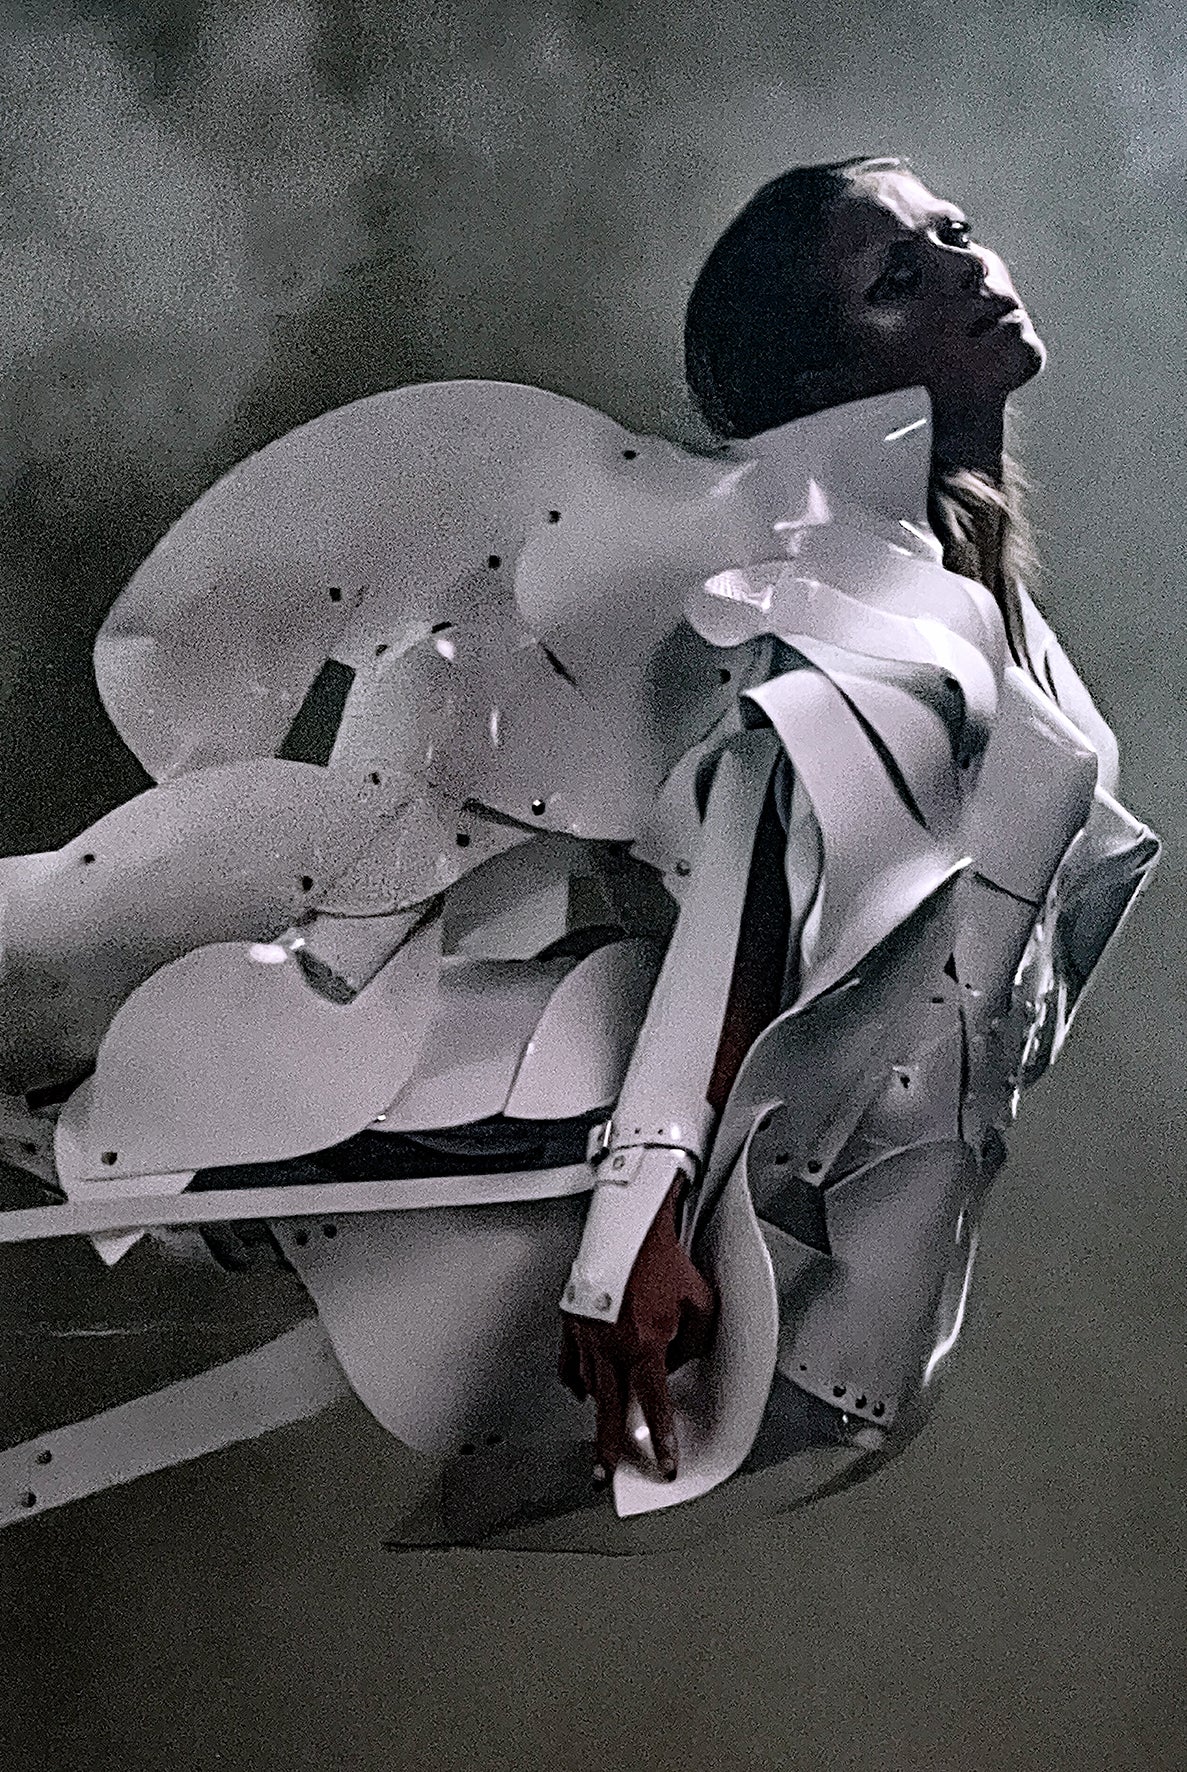 Every Carcass Like a Diamond Fashion film with costume and style by Jivomir Domoustchiev